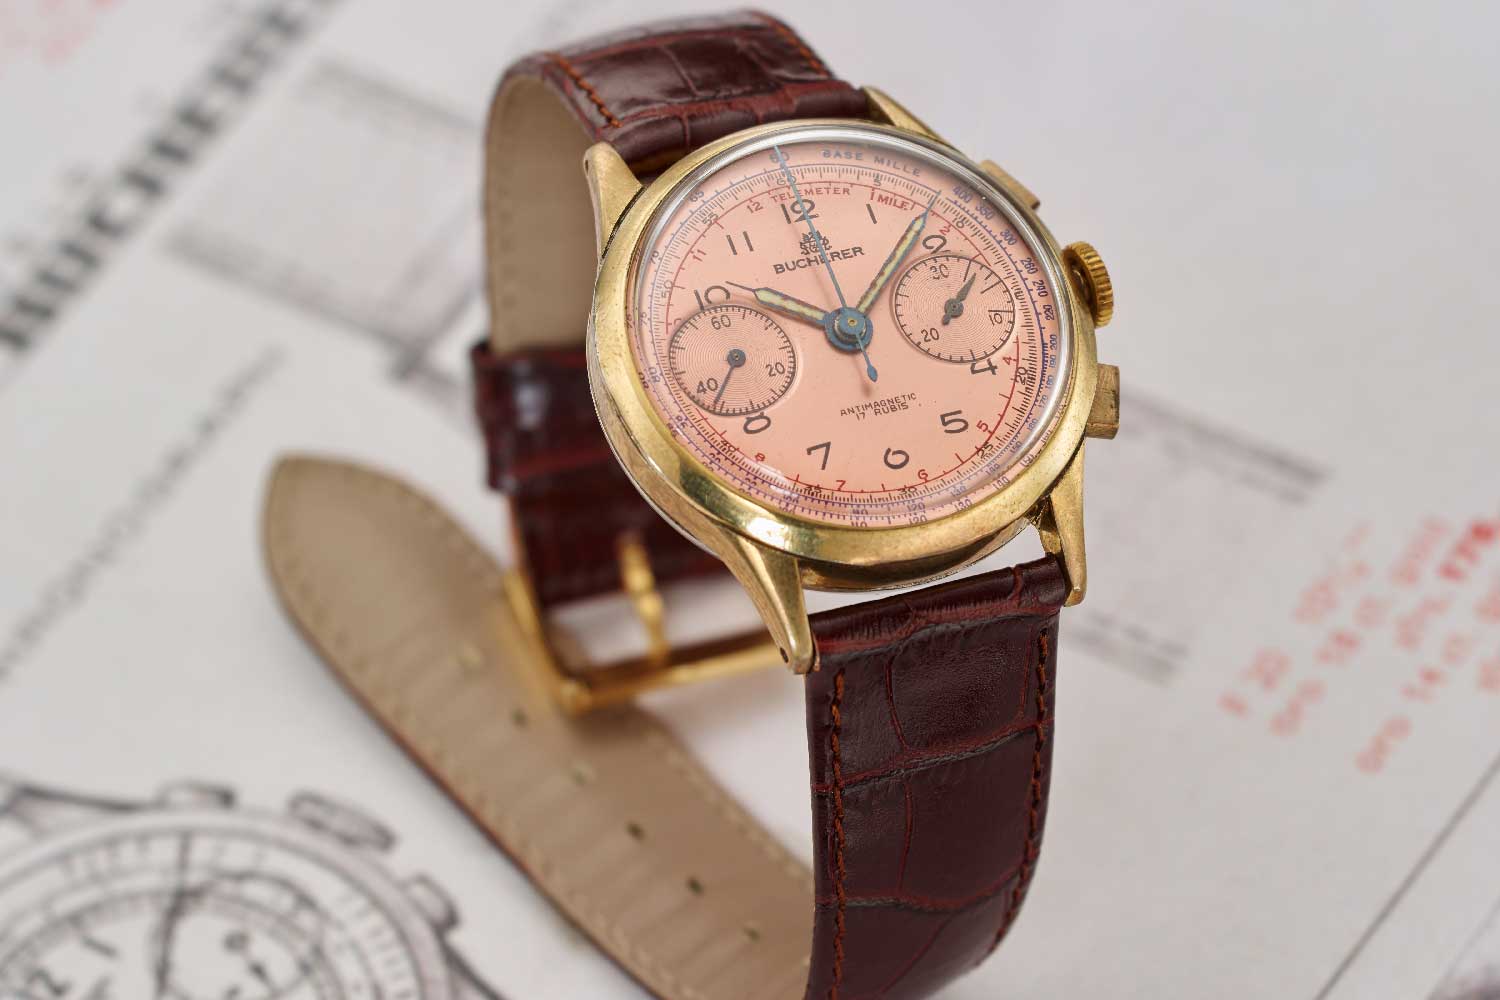 The BiCompax chronograph with its salmon coloured dial and gold case was developed at the end of the 1940s and was made available for sale around 1950. This Chronograph was the precursor to the modern wristwatch and an inspiration for the new Heritage BiCompax Annual.